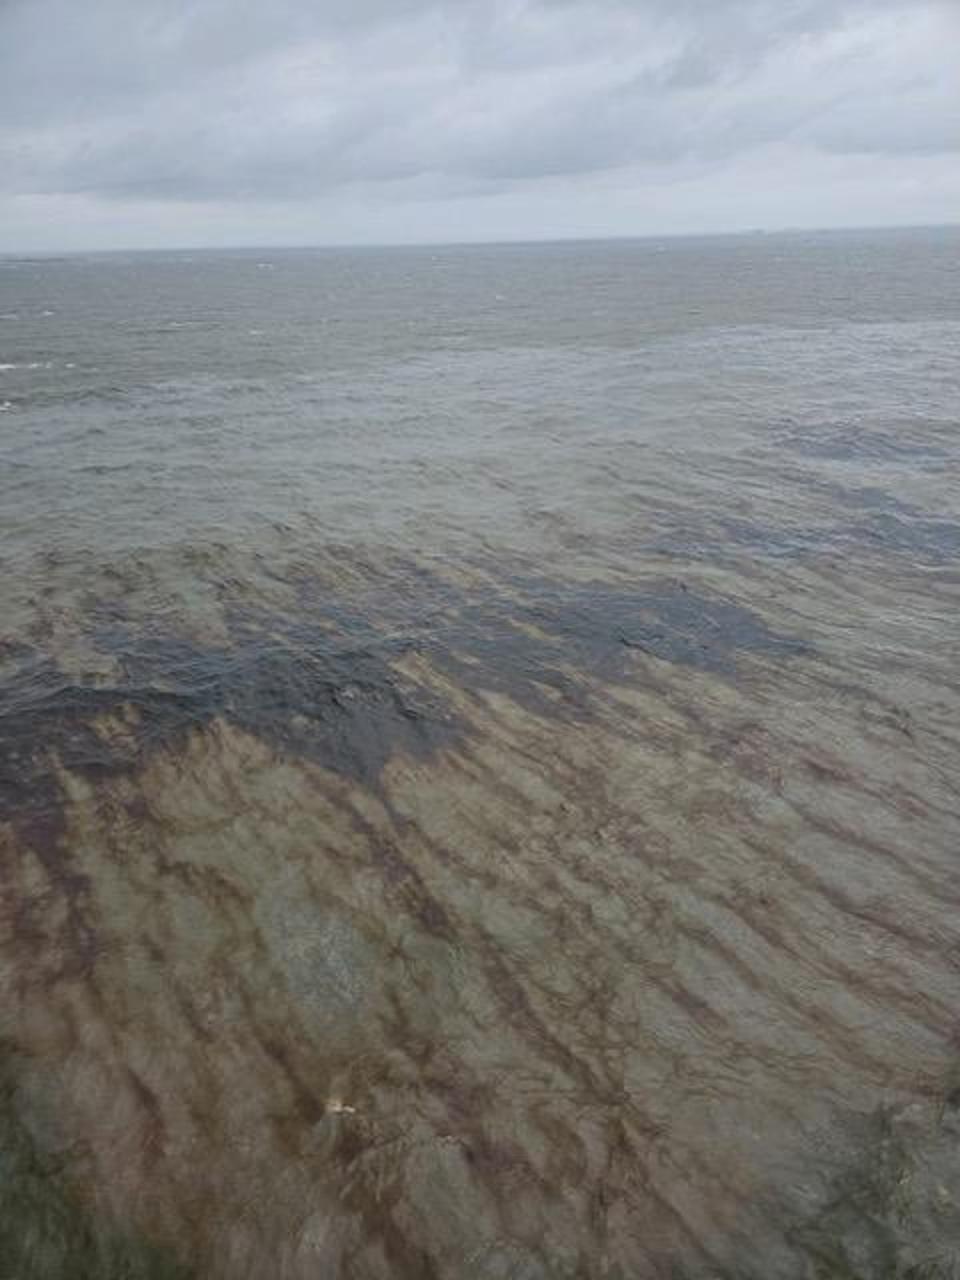 Gulf of Mexico oil spill (US Coast Guard)